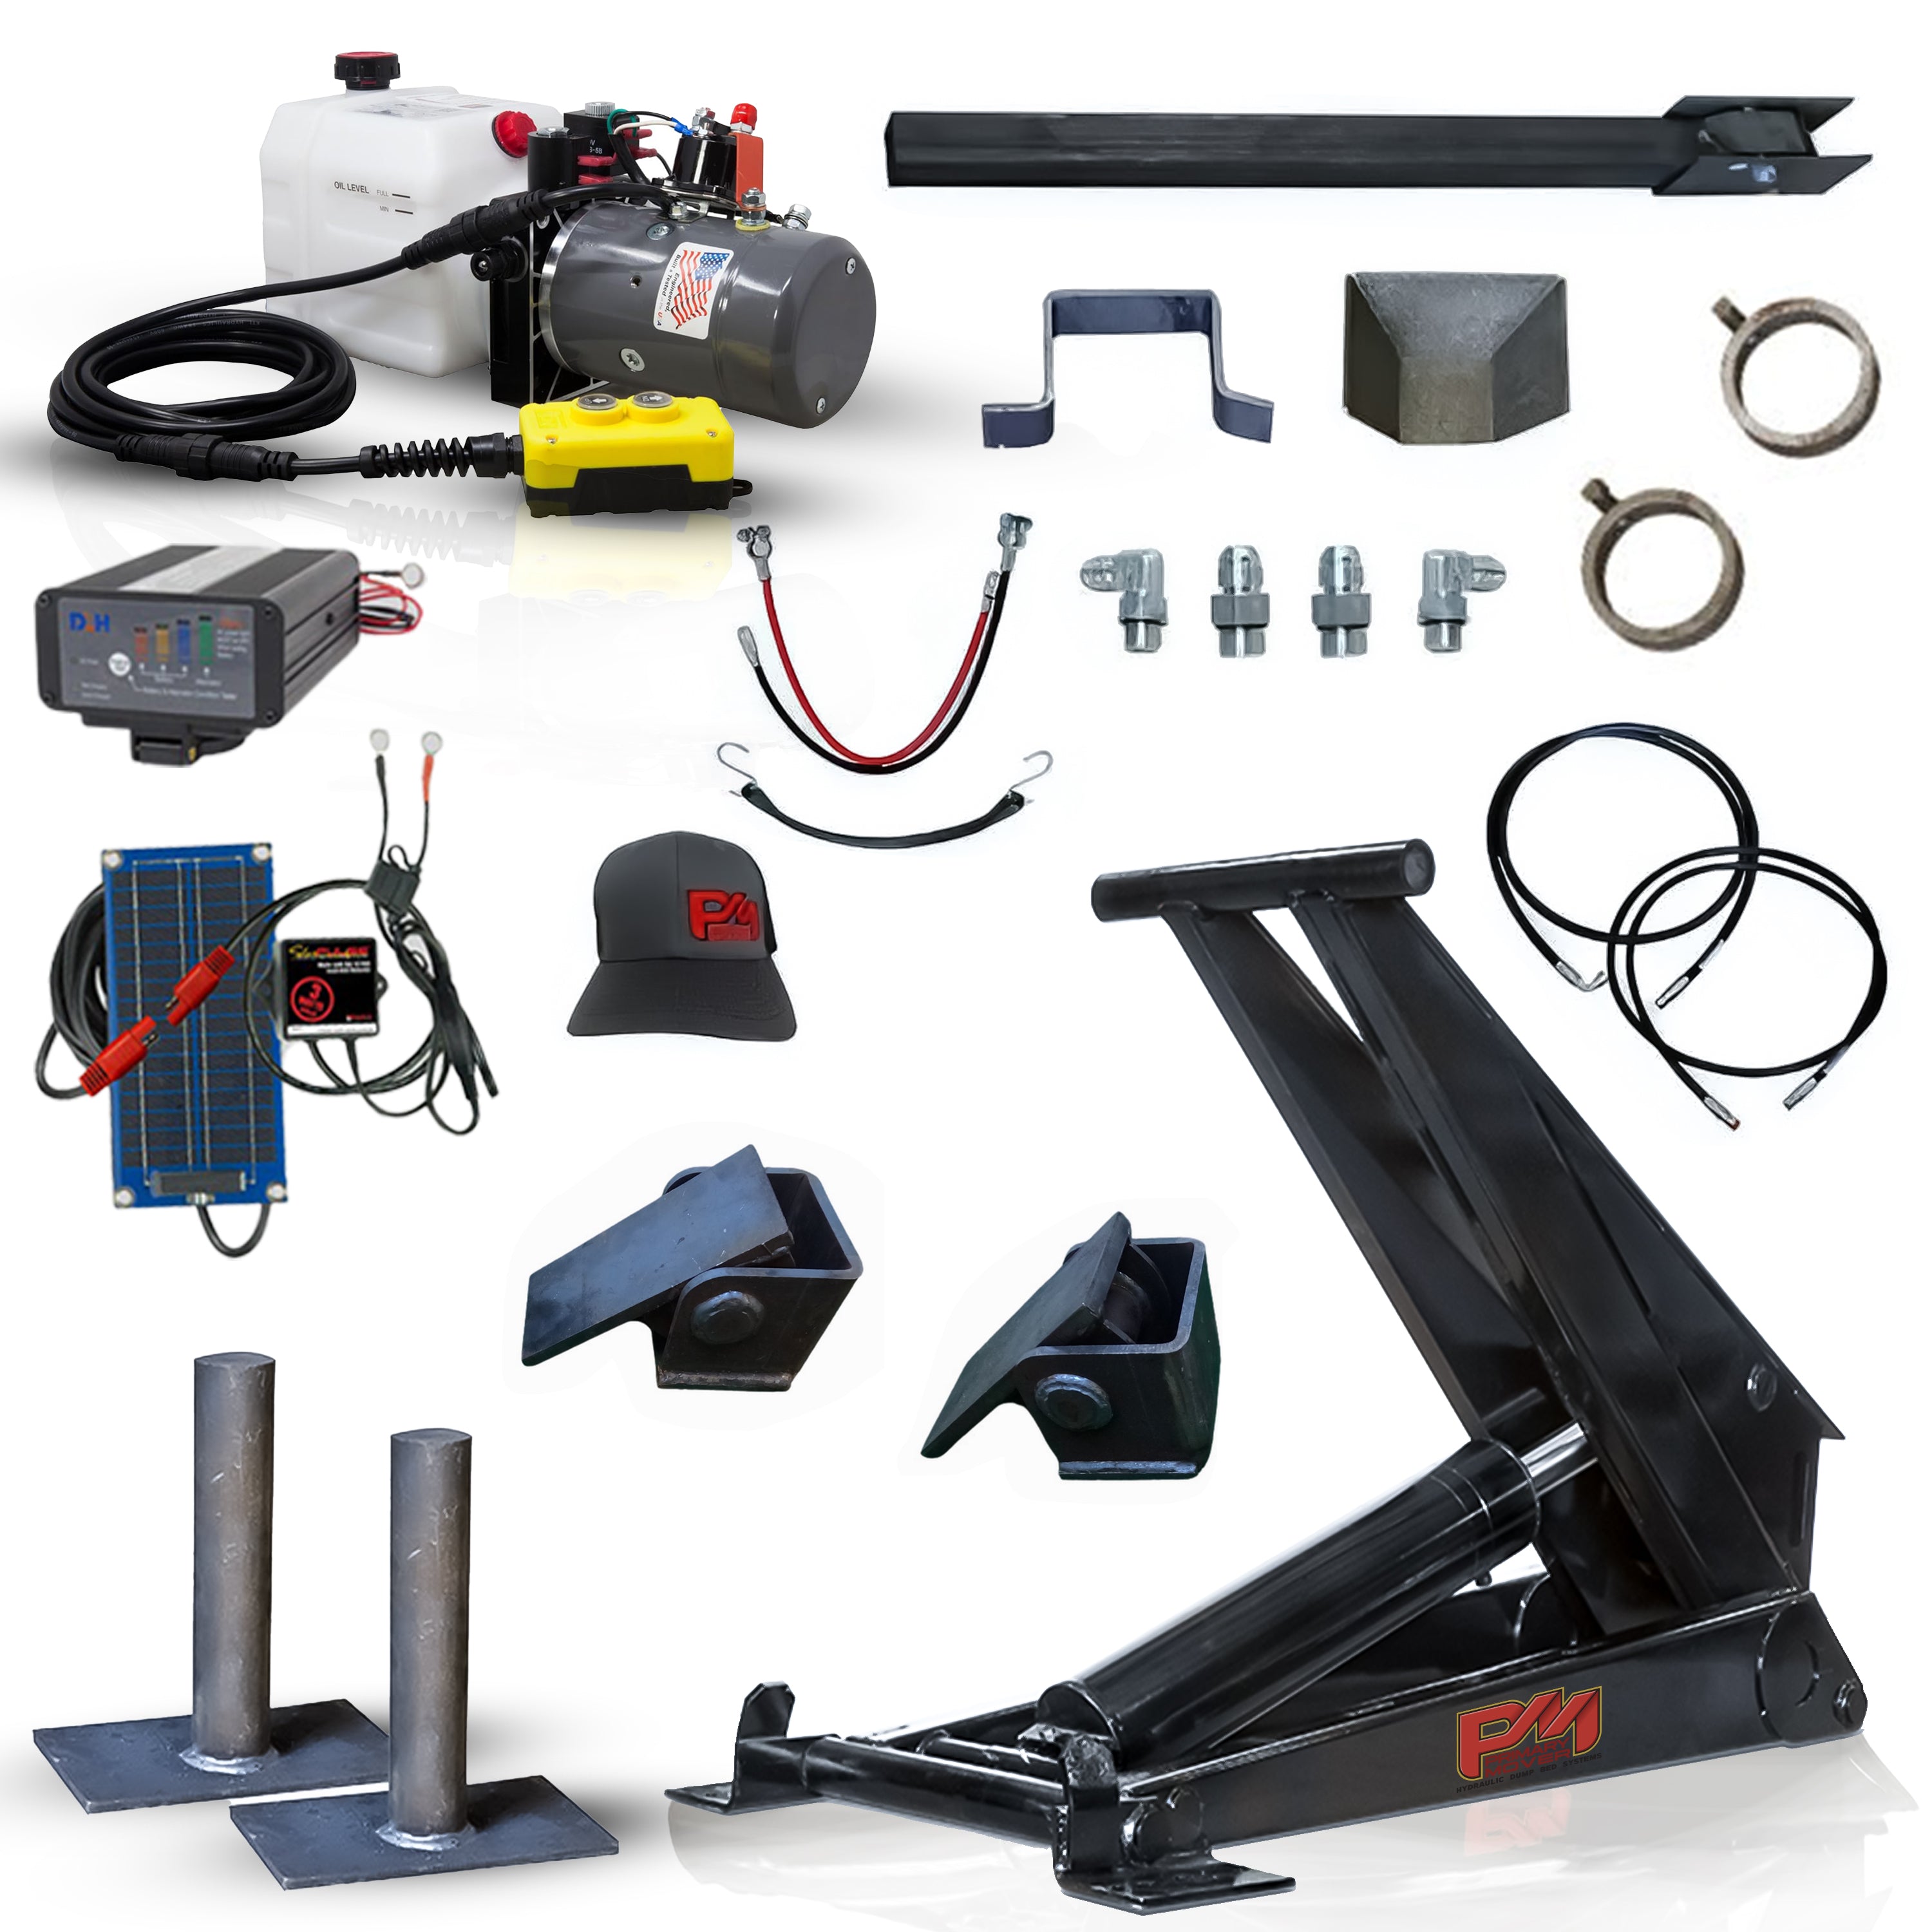 Hydraulic Scissor Hoist Kit - 12 Ton Capacity - Fits 16-20' Dump Body | PF-625. Collage of machine, black car jack, tools, logo, and cable. Includes cylinder, mounting brackets, hydraulic pump, and safety features.